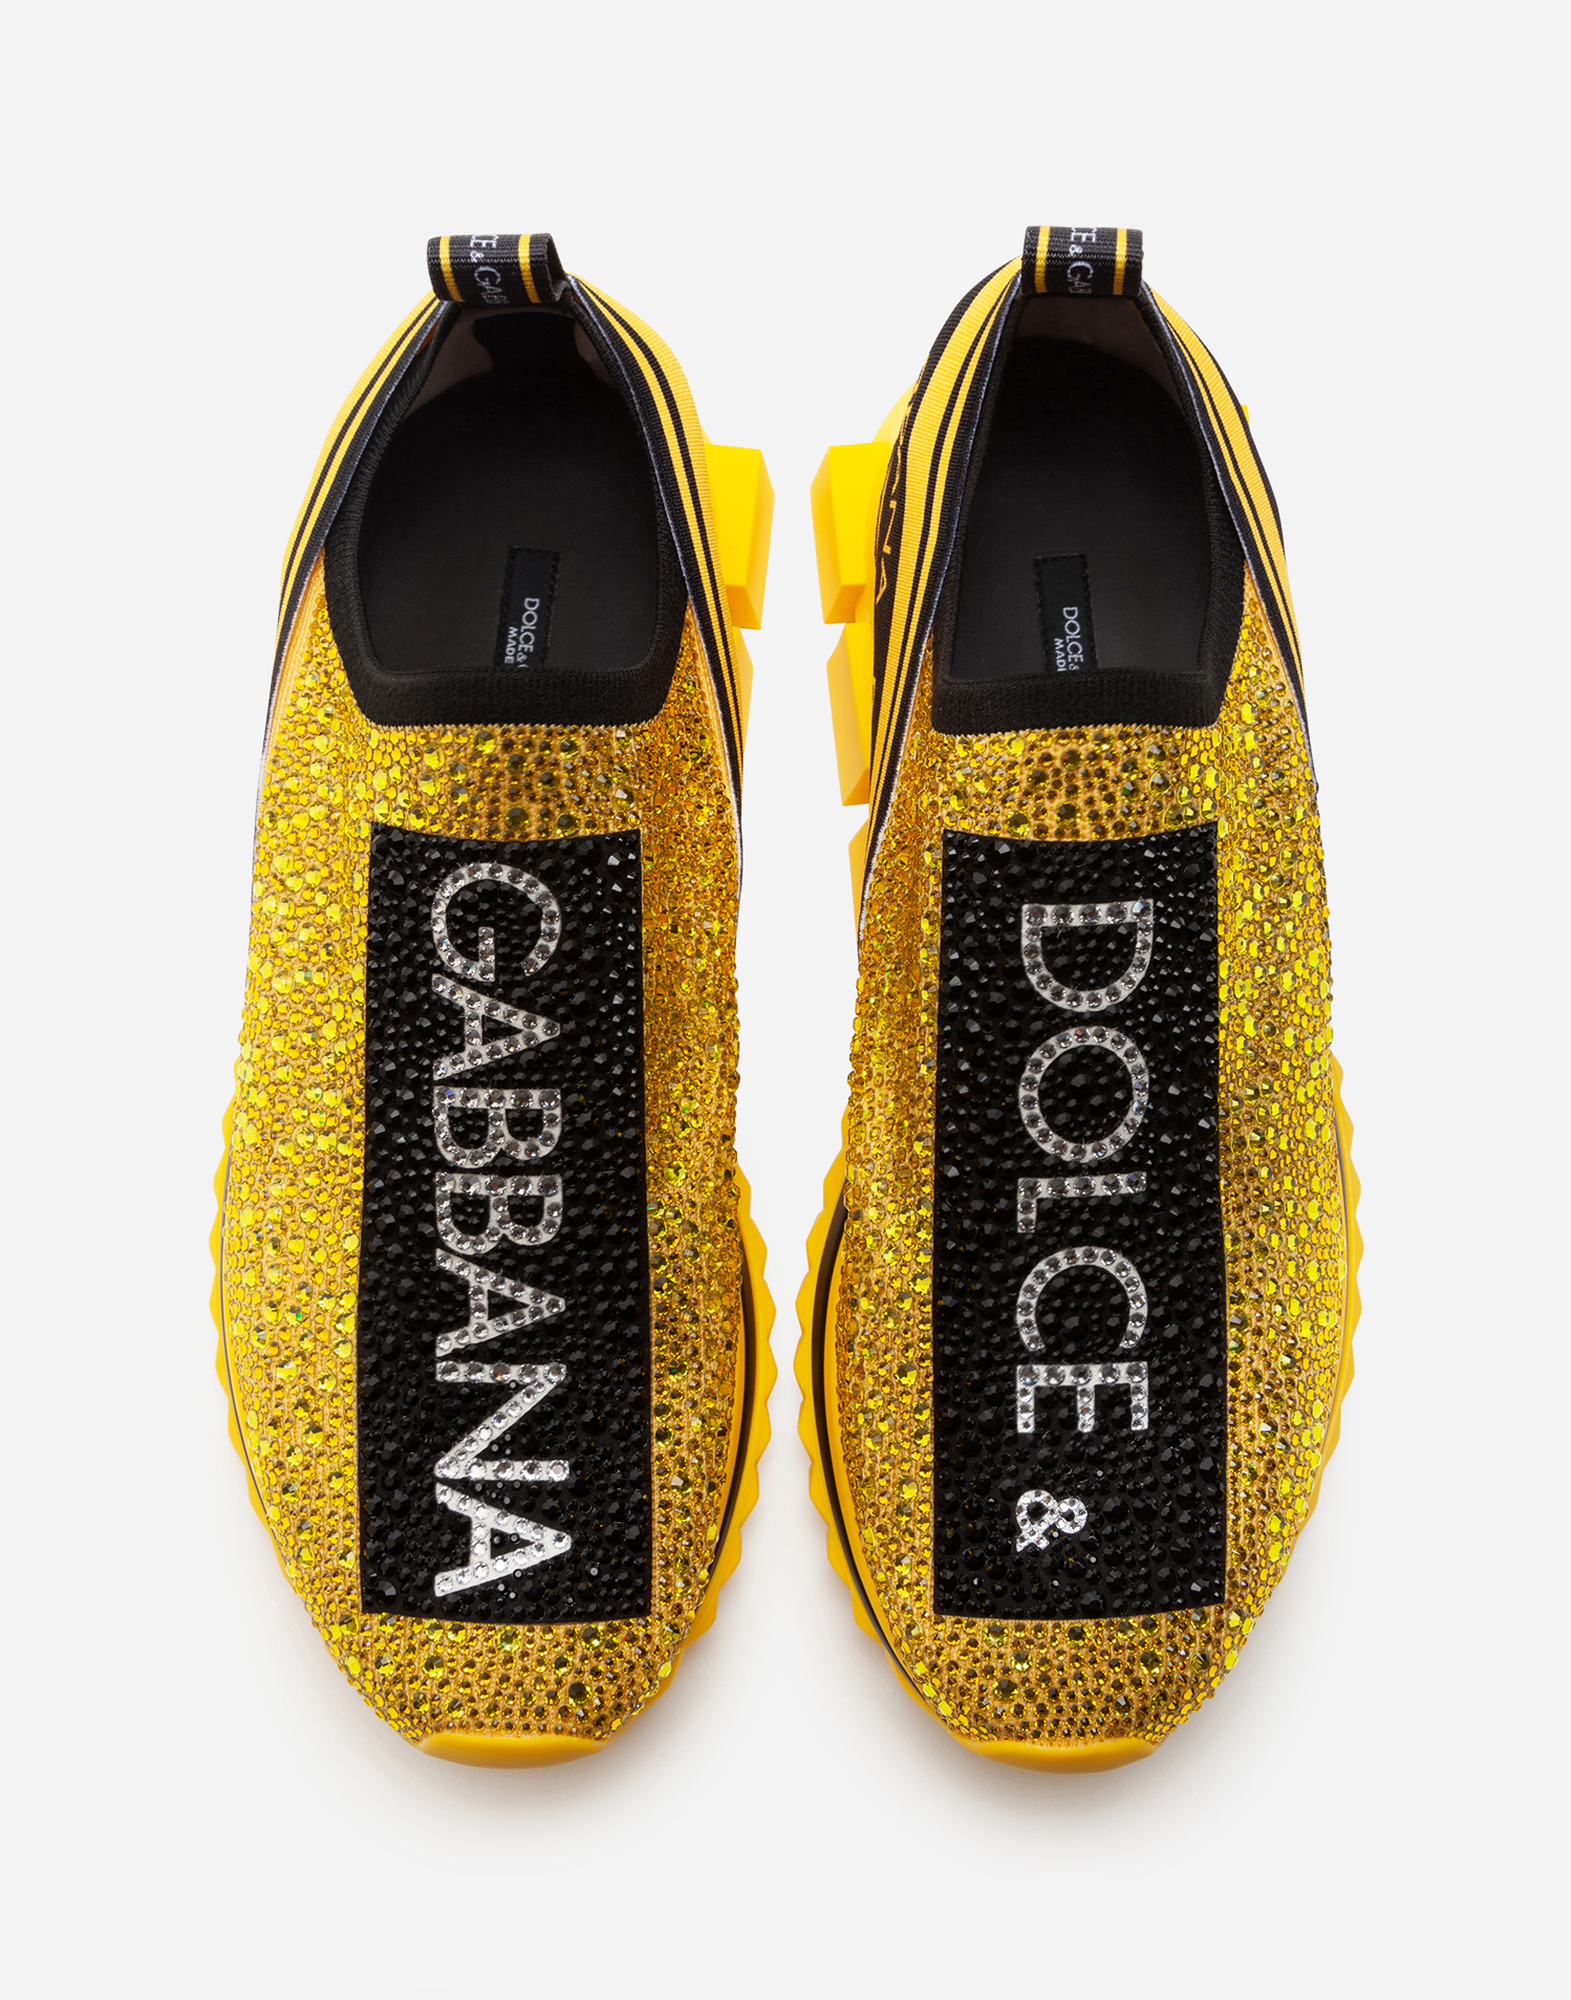 d&g shoes yellow